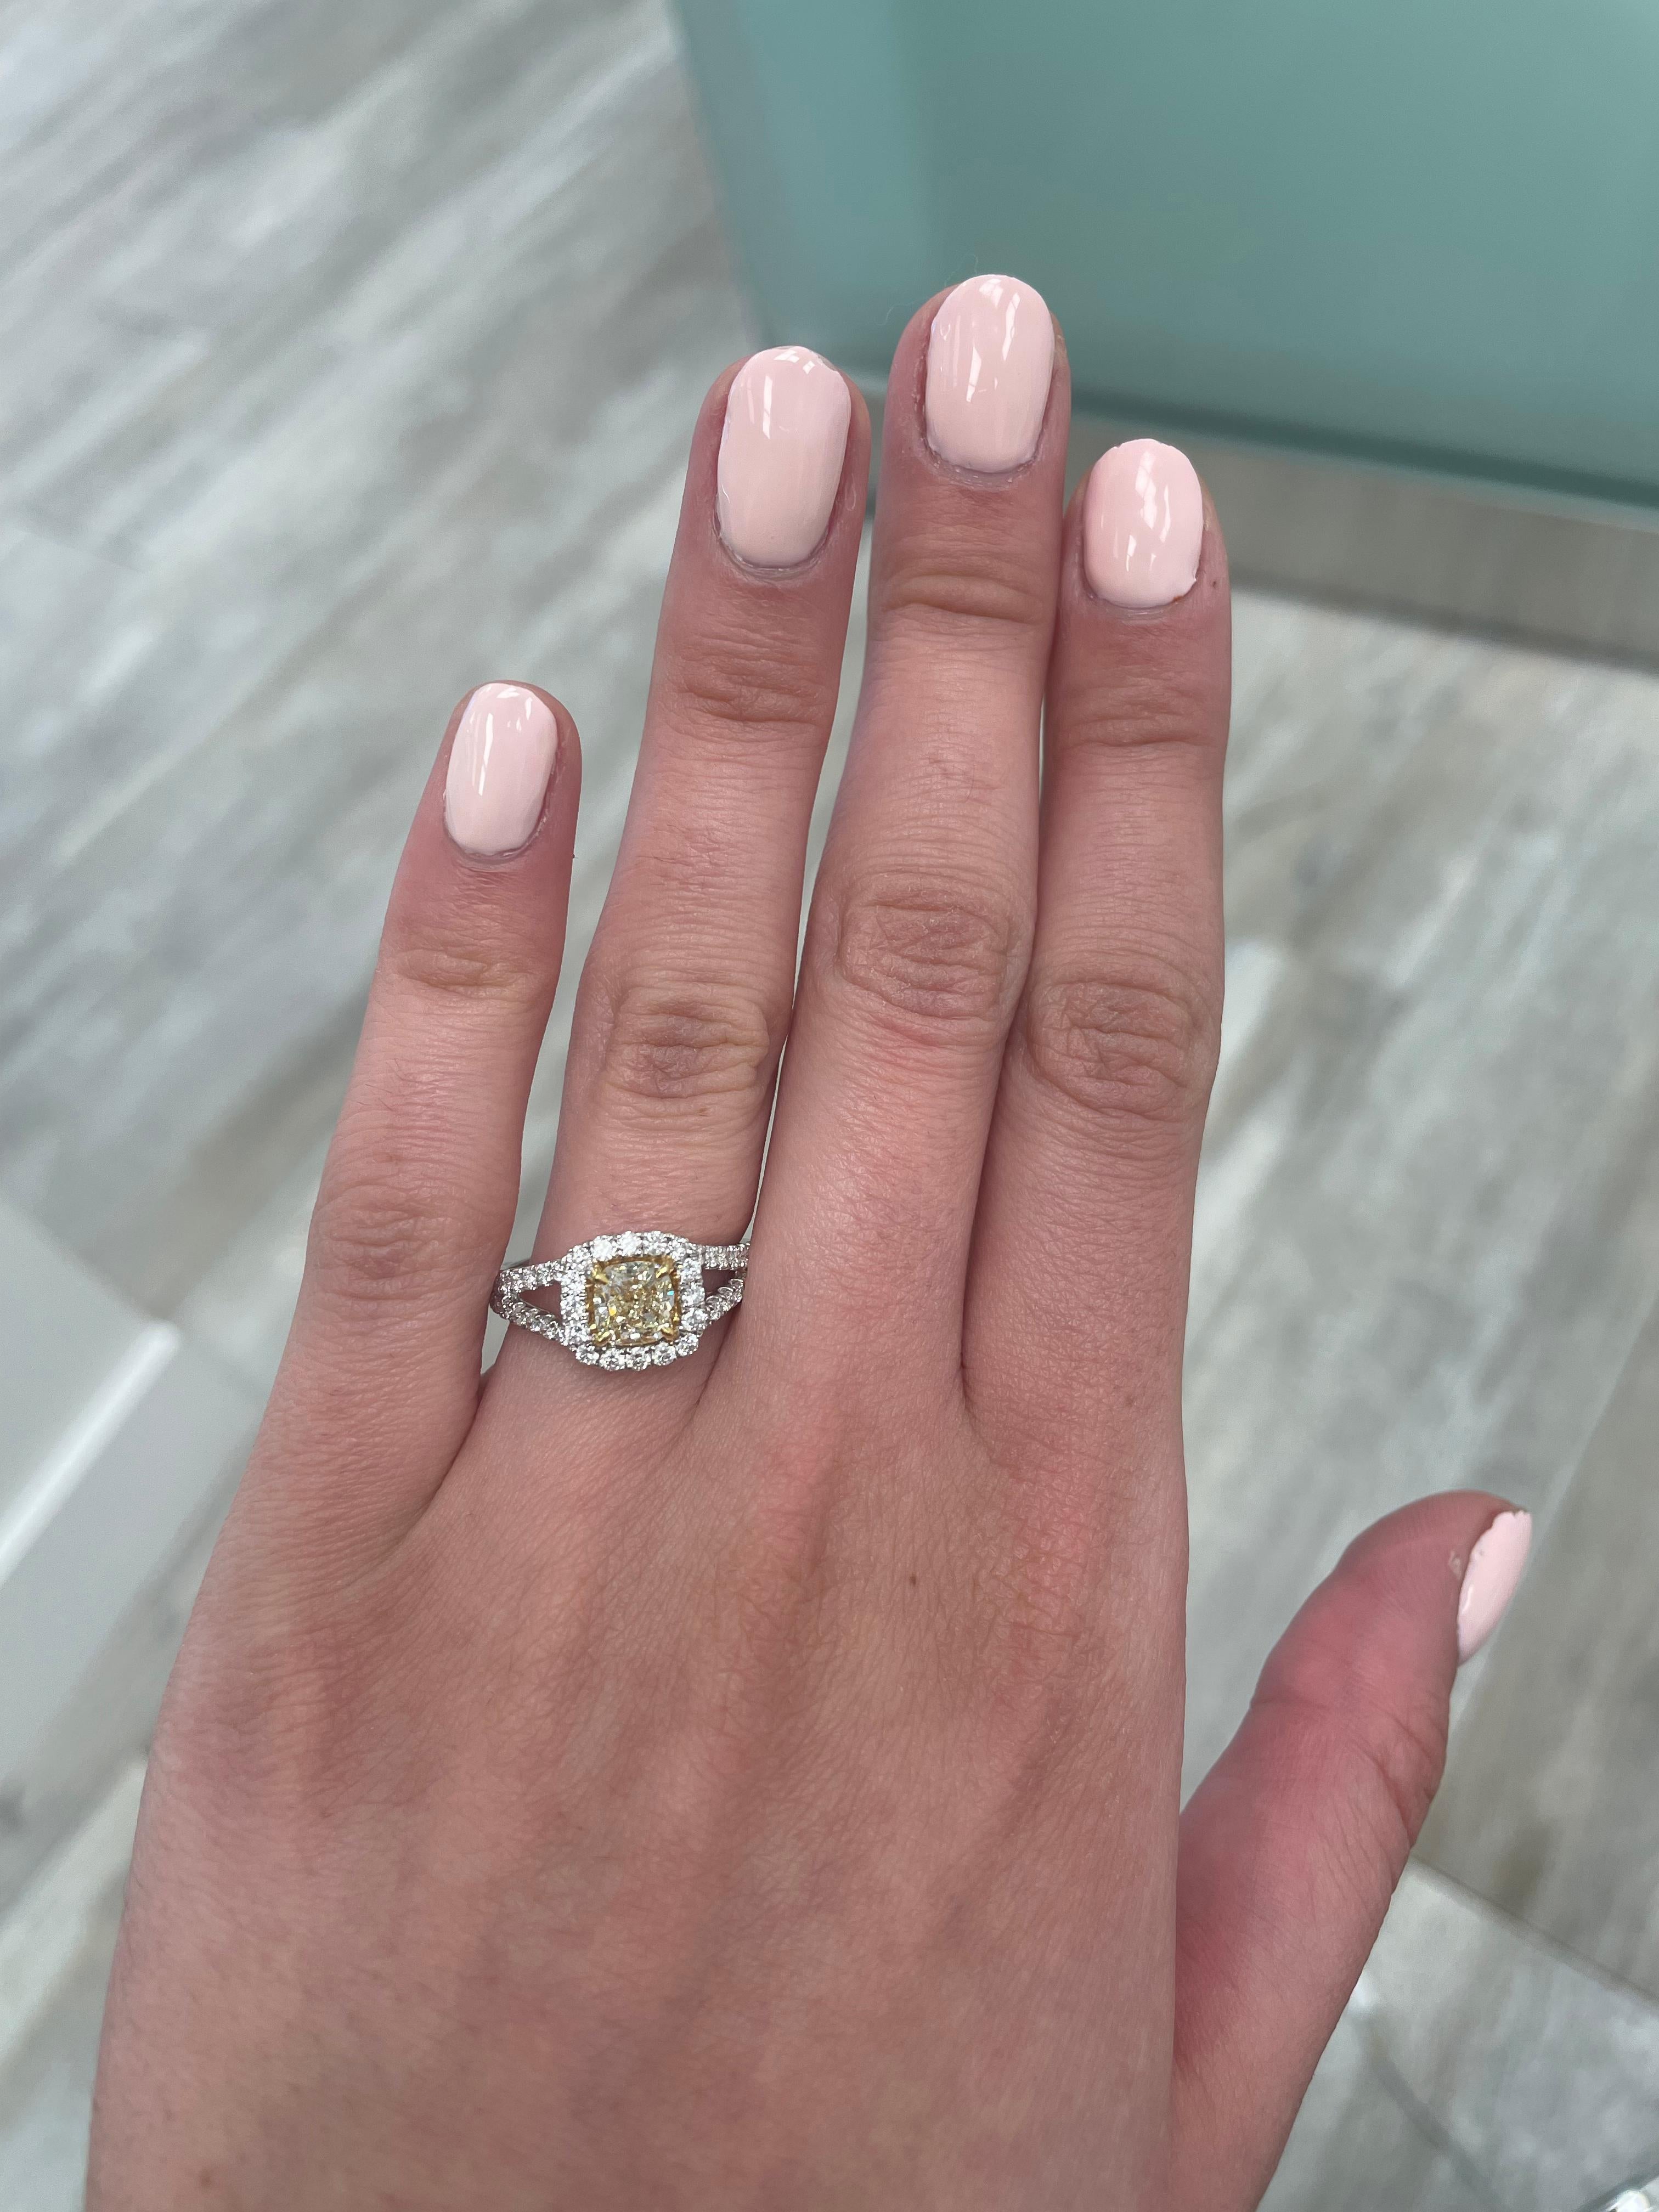 Stunning modern EGL certified yellow diamond with halo ring, two-tone 18k yellow and white gold. By Alexander Beverly Hills
1.72 carats total diamond weight.
1.05 carat cushion cut Fancy Yellow color and VS1 clarity diamond, EGL graded. Complimented